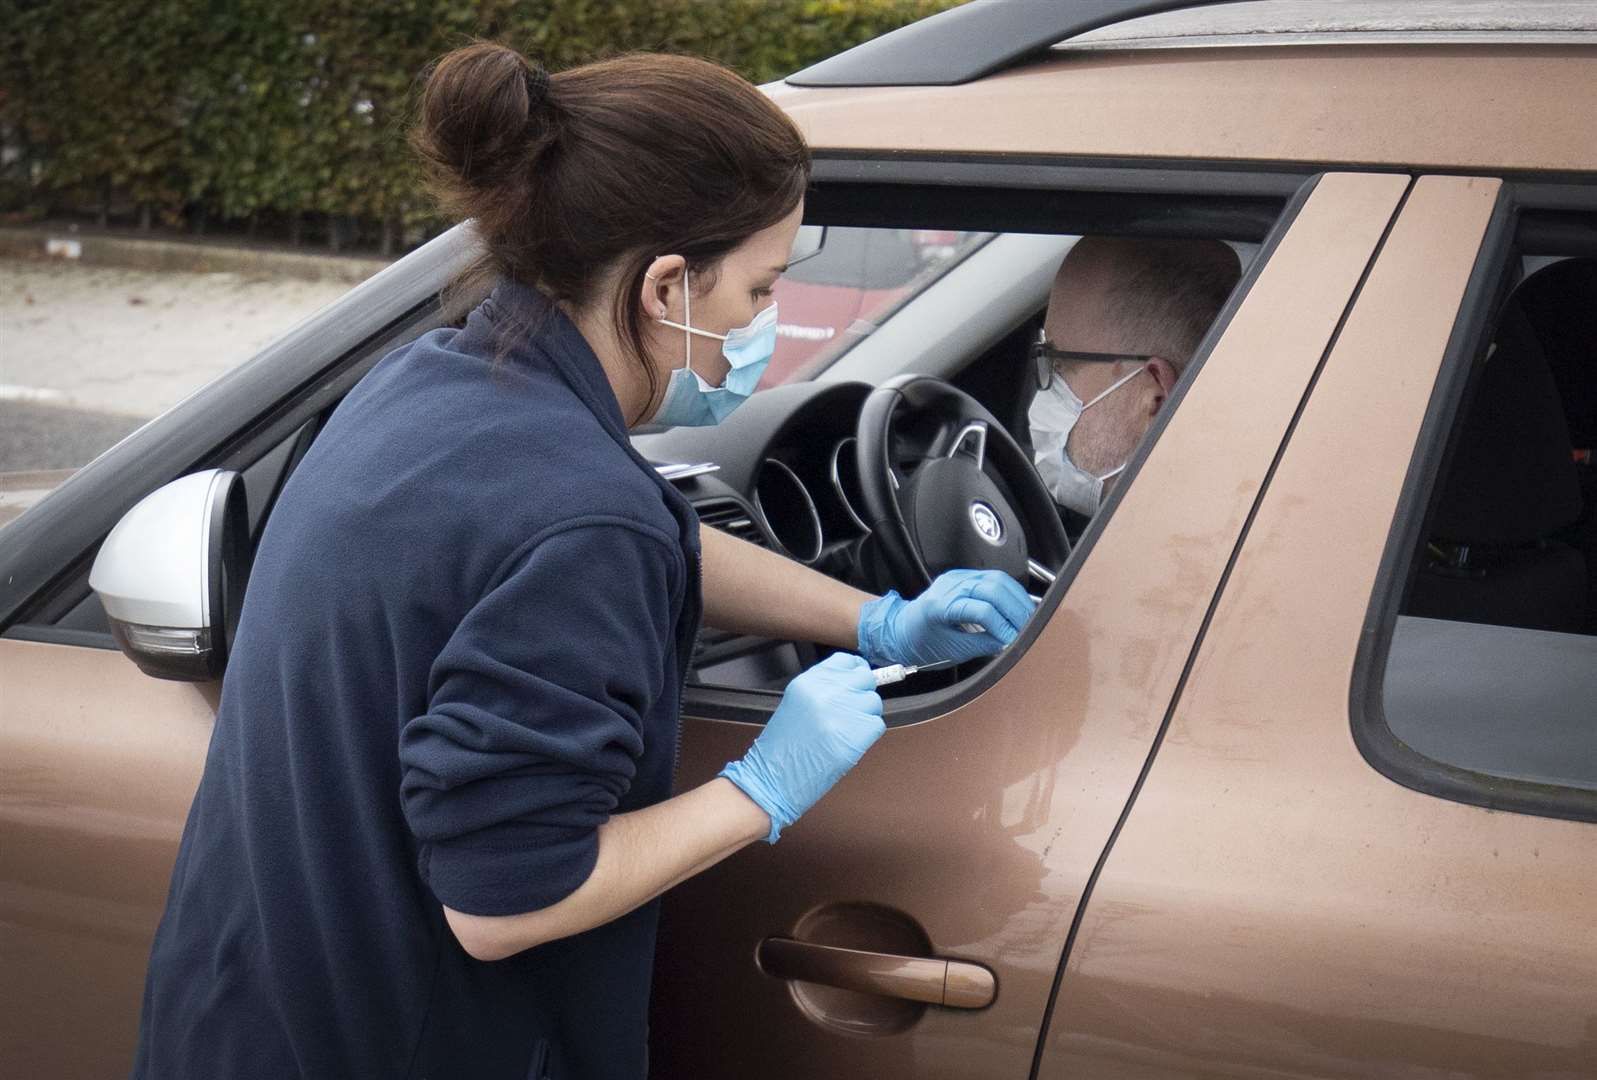 Flu vaccines were also given at drive-thru centres last year (Jane Barlow/PA)